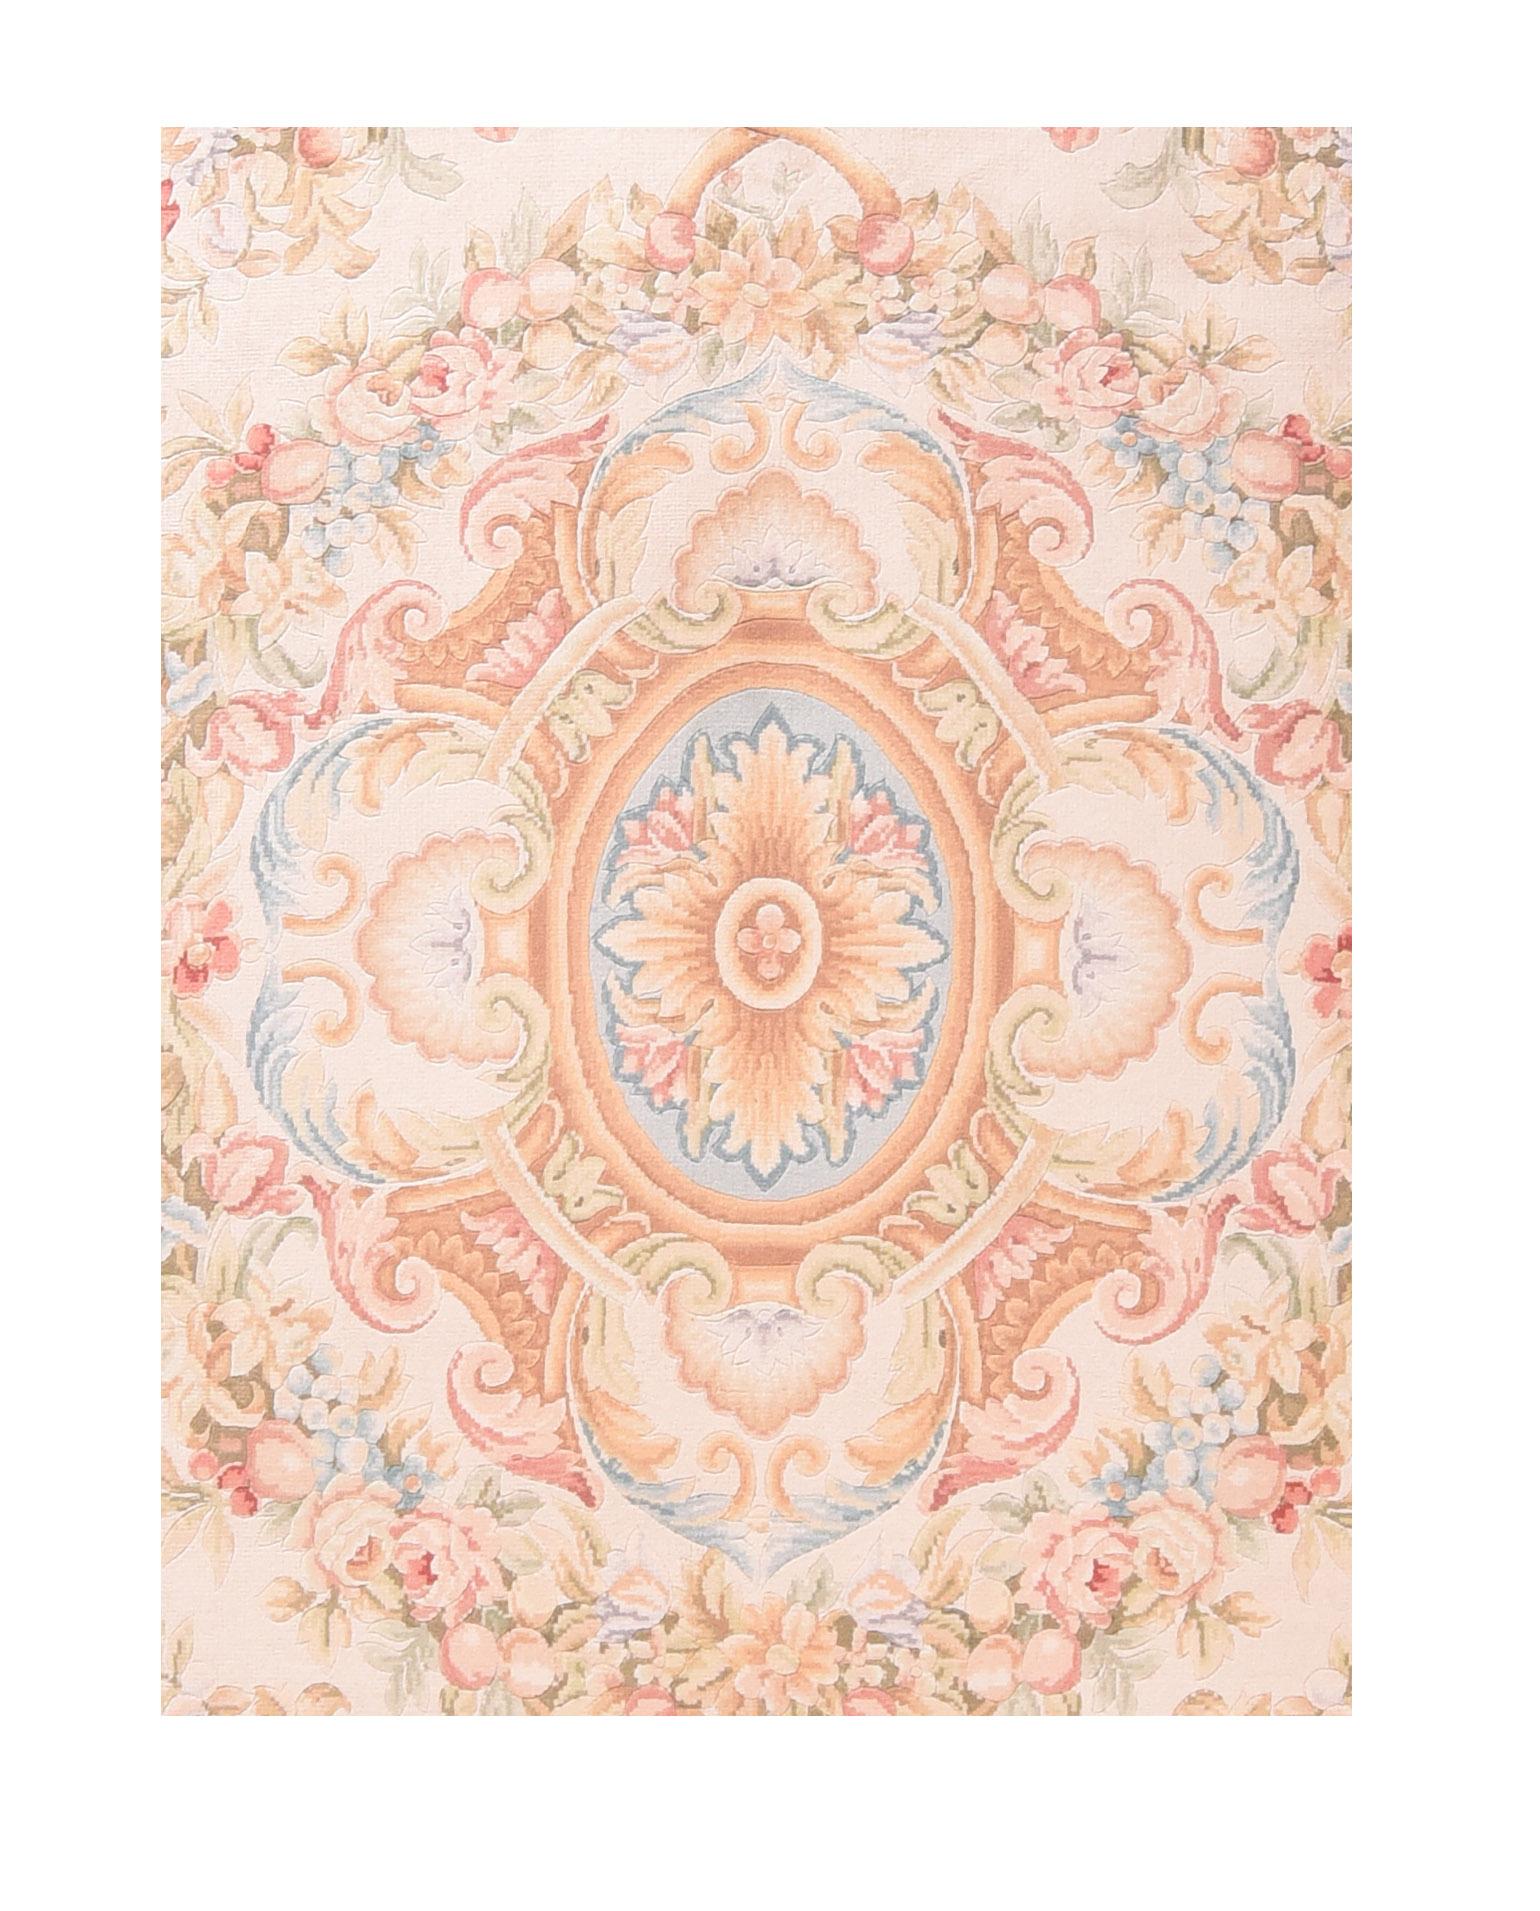 Fine savonery weave rug, hand knotted

Design: Center Medalion

The Savonnerie manufactory was the most prestigious European manufactory of knotted-pile carpets, enjoying its greatest period circa 1650-1685; the cachet of its name is casually